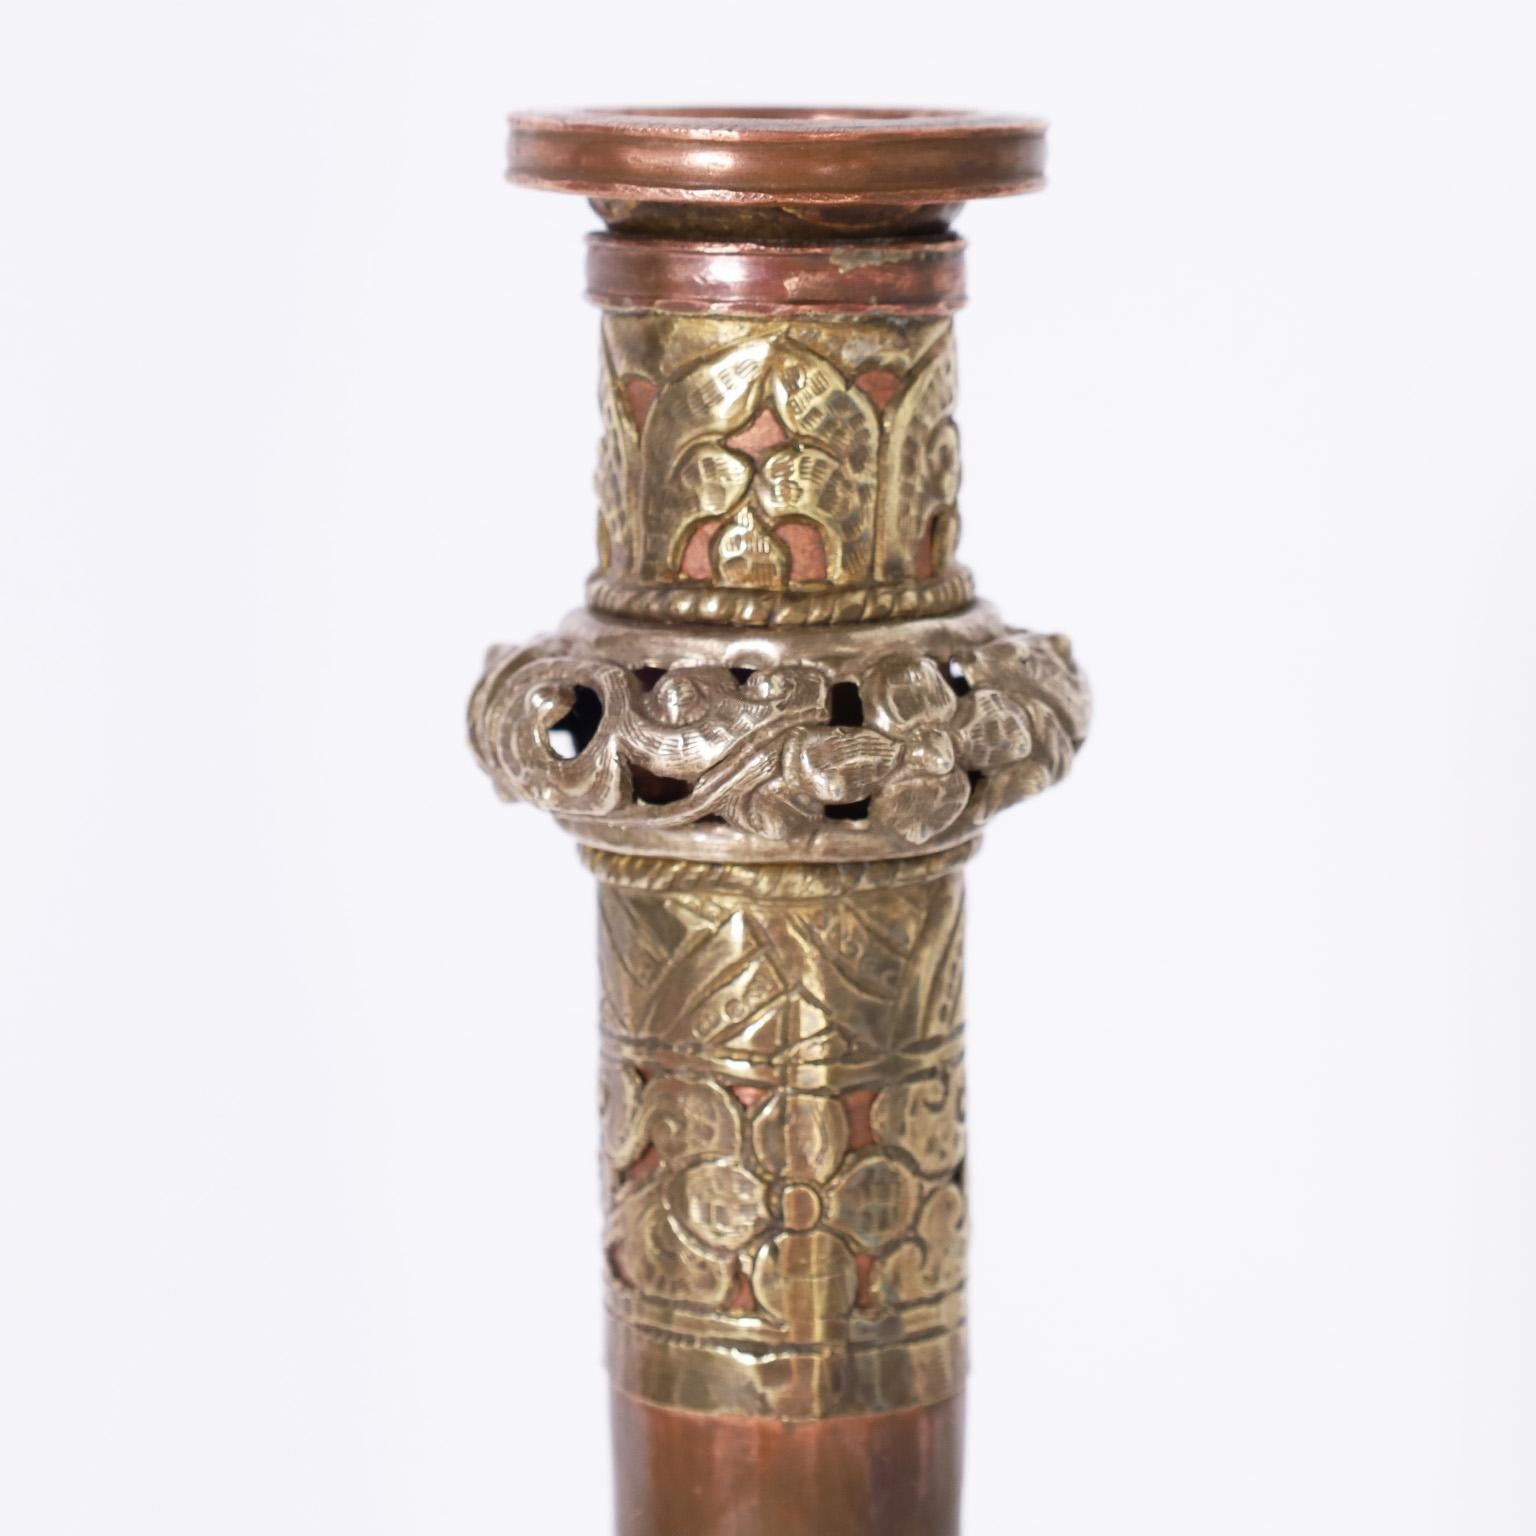 Lofty Tibetan Dungchen ceremonial long horn crafted with copper and brass in a dramatic telescoping sculptural form. 

Retracted height: 25